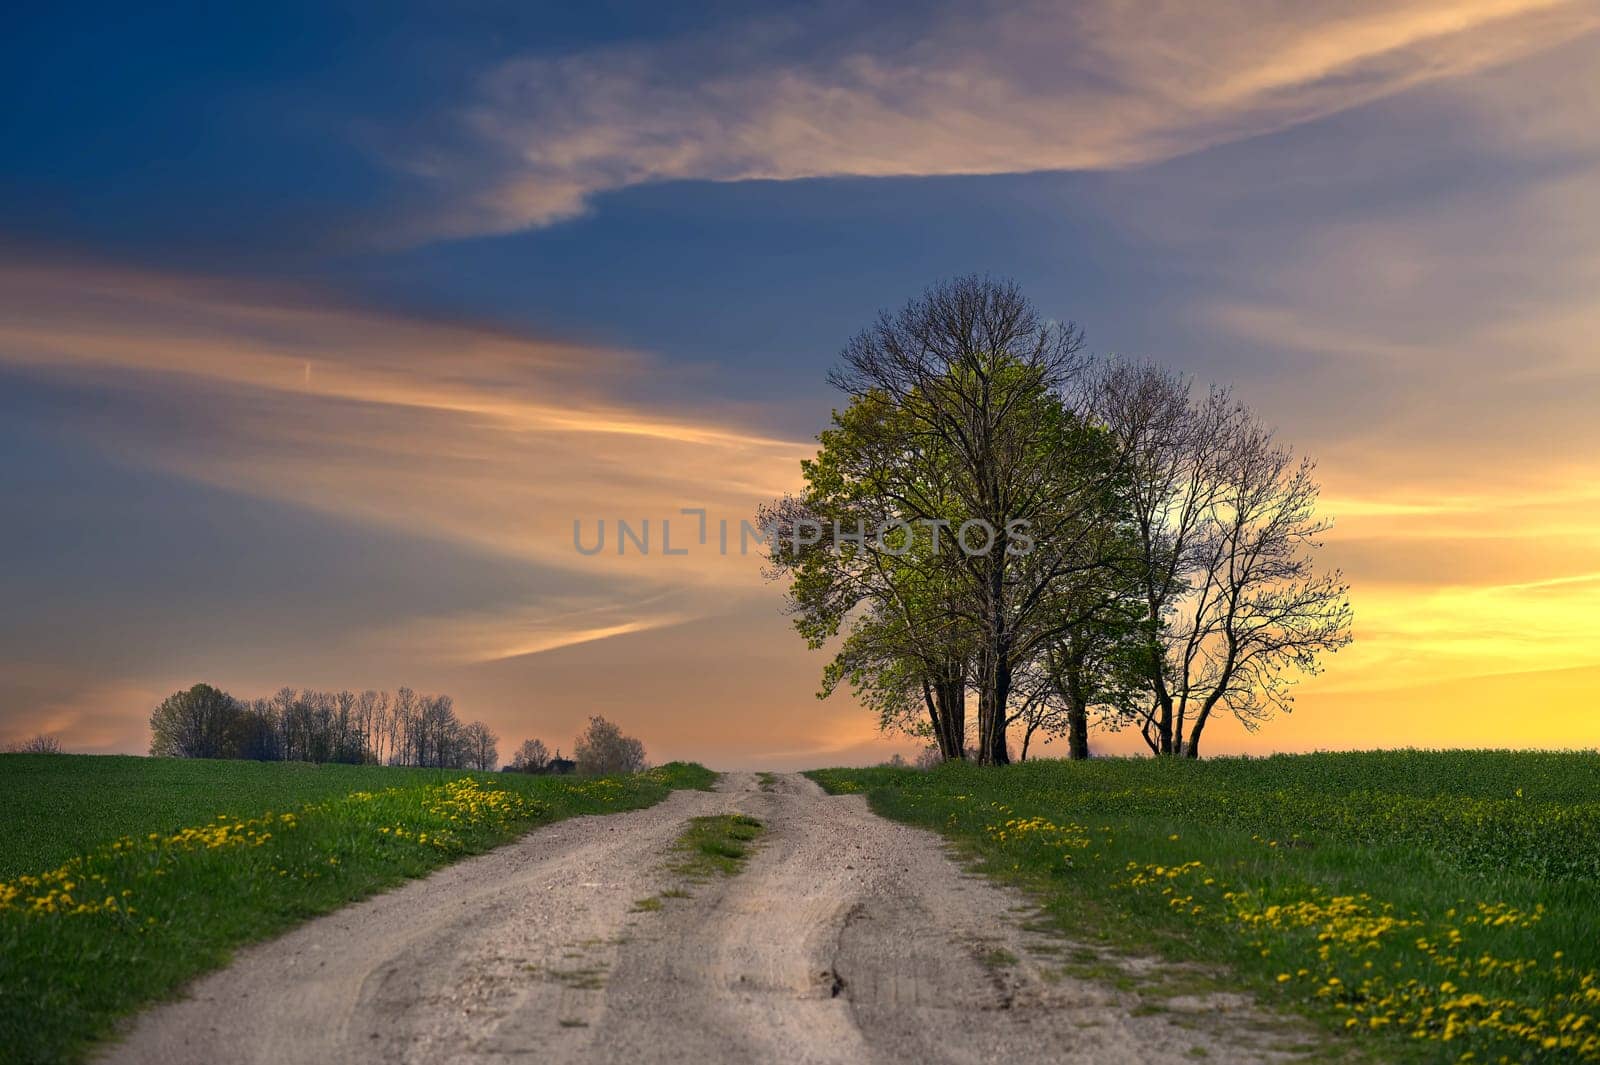 Rural scene featuring a straight, dirt country road extending from the foreground to the distance, sky painted with beautiful gradient of deep blue, light blue and yellow hues as result of the sunset